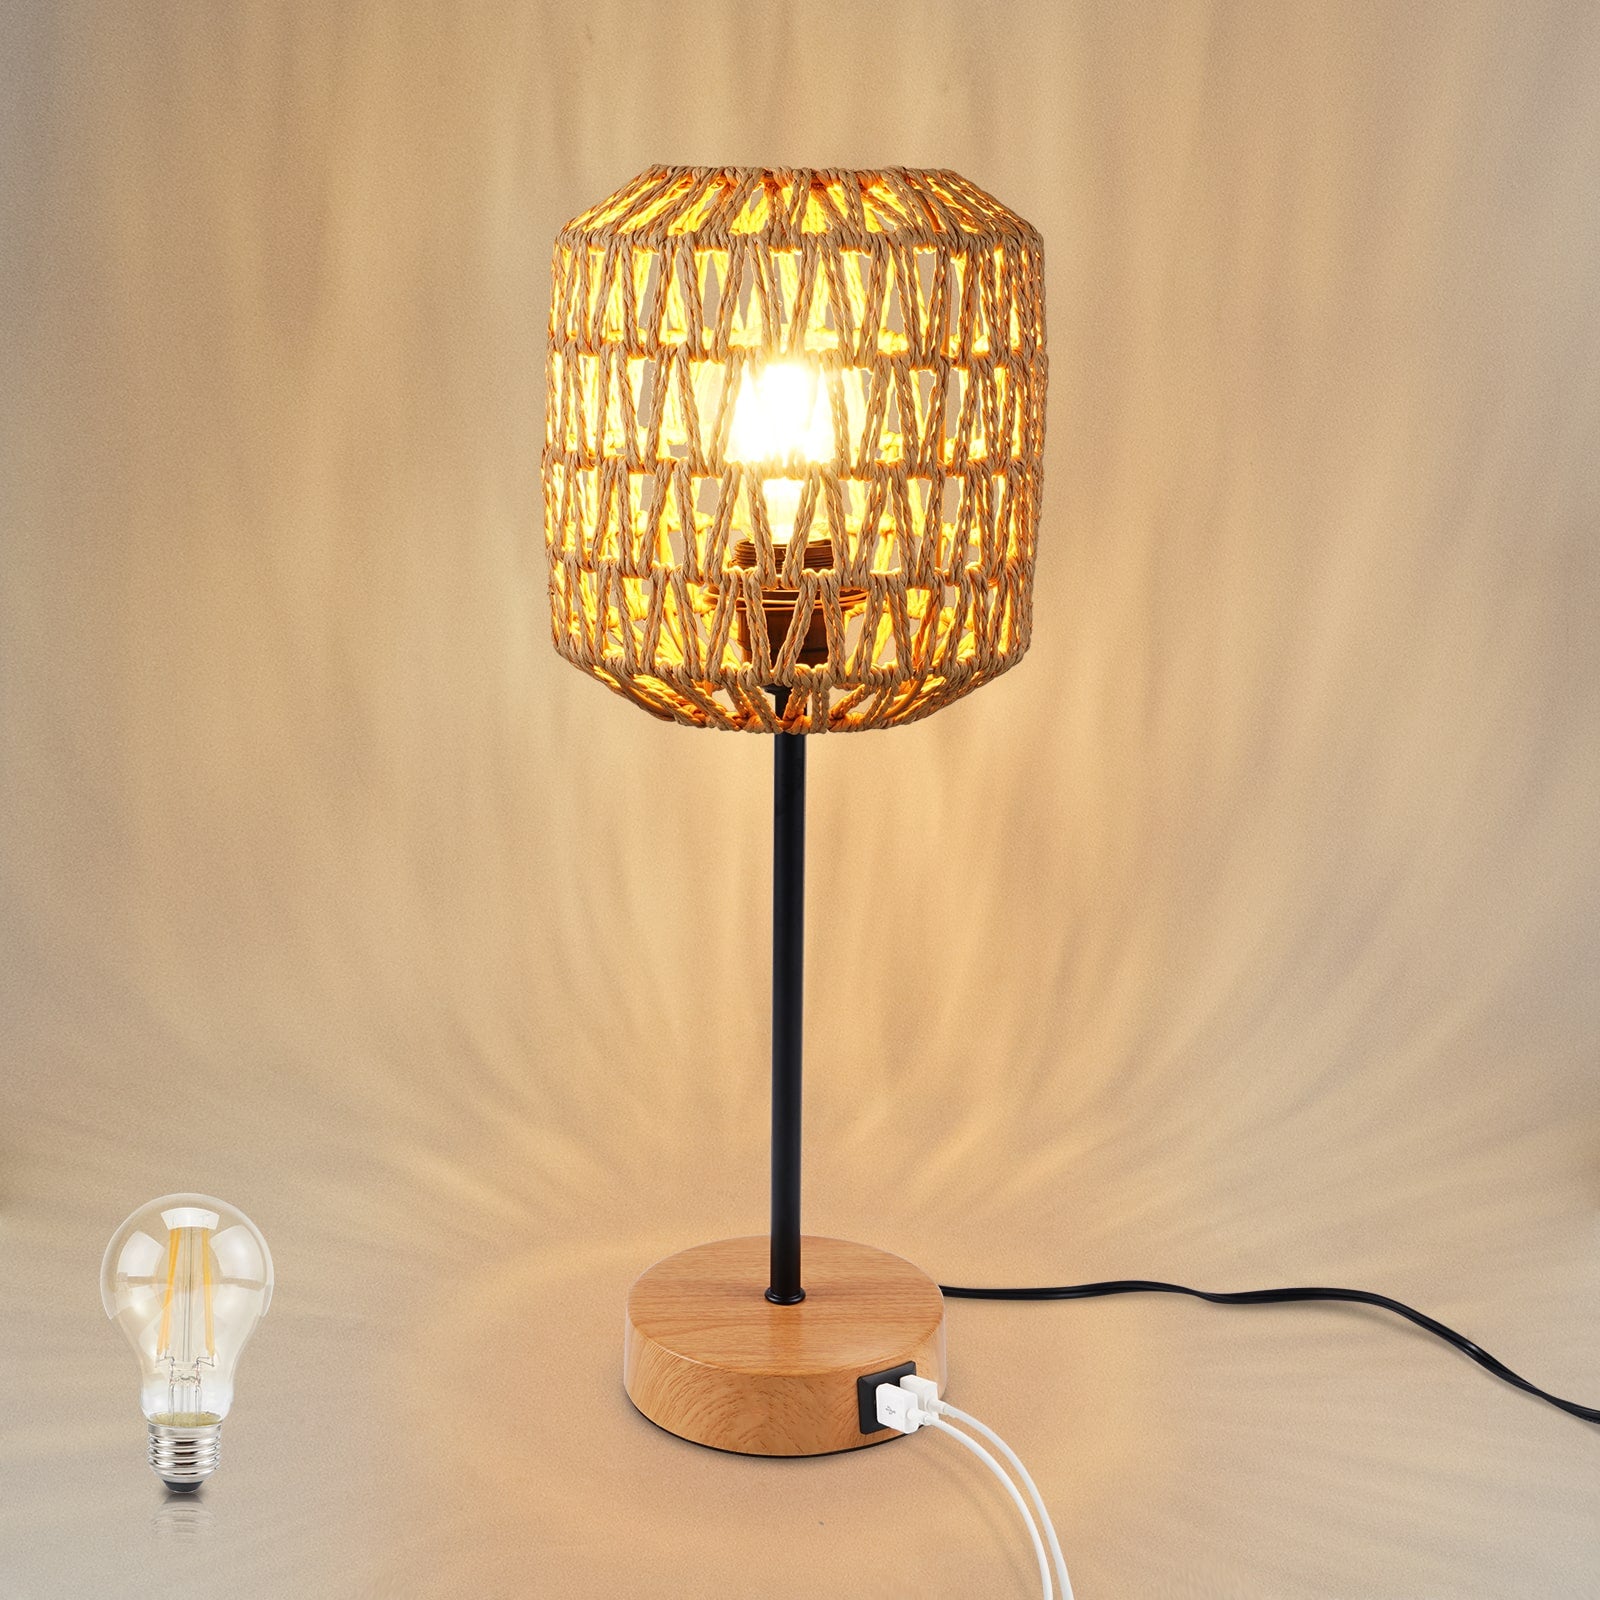 N02 Vintage Rattan Table Lamp with USB Charging Ports and AC Outlet for Bedroom